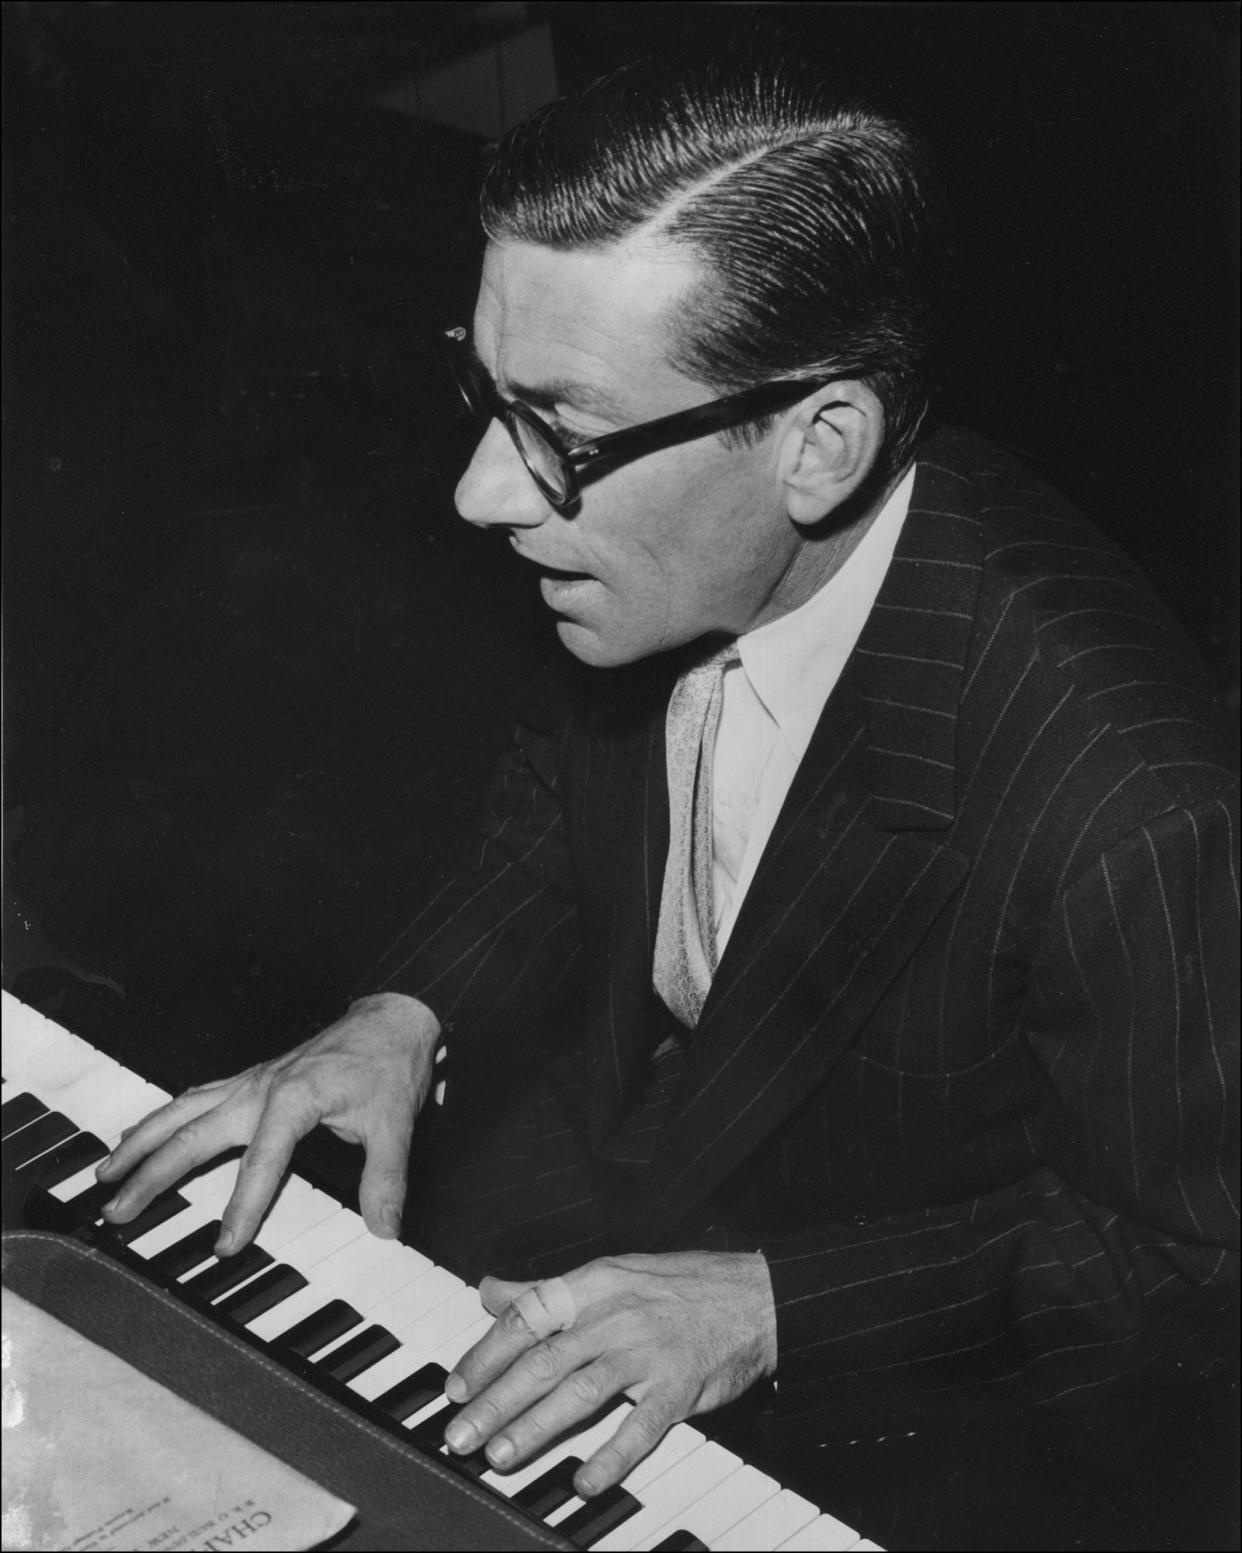 Hoagy Carmichael,at The indianapolis Press Club in the late 1940s.